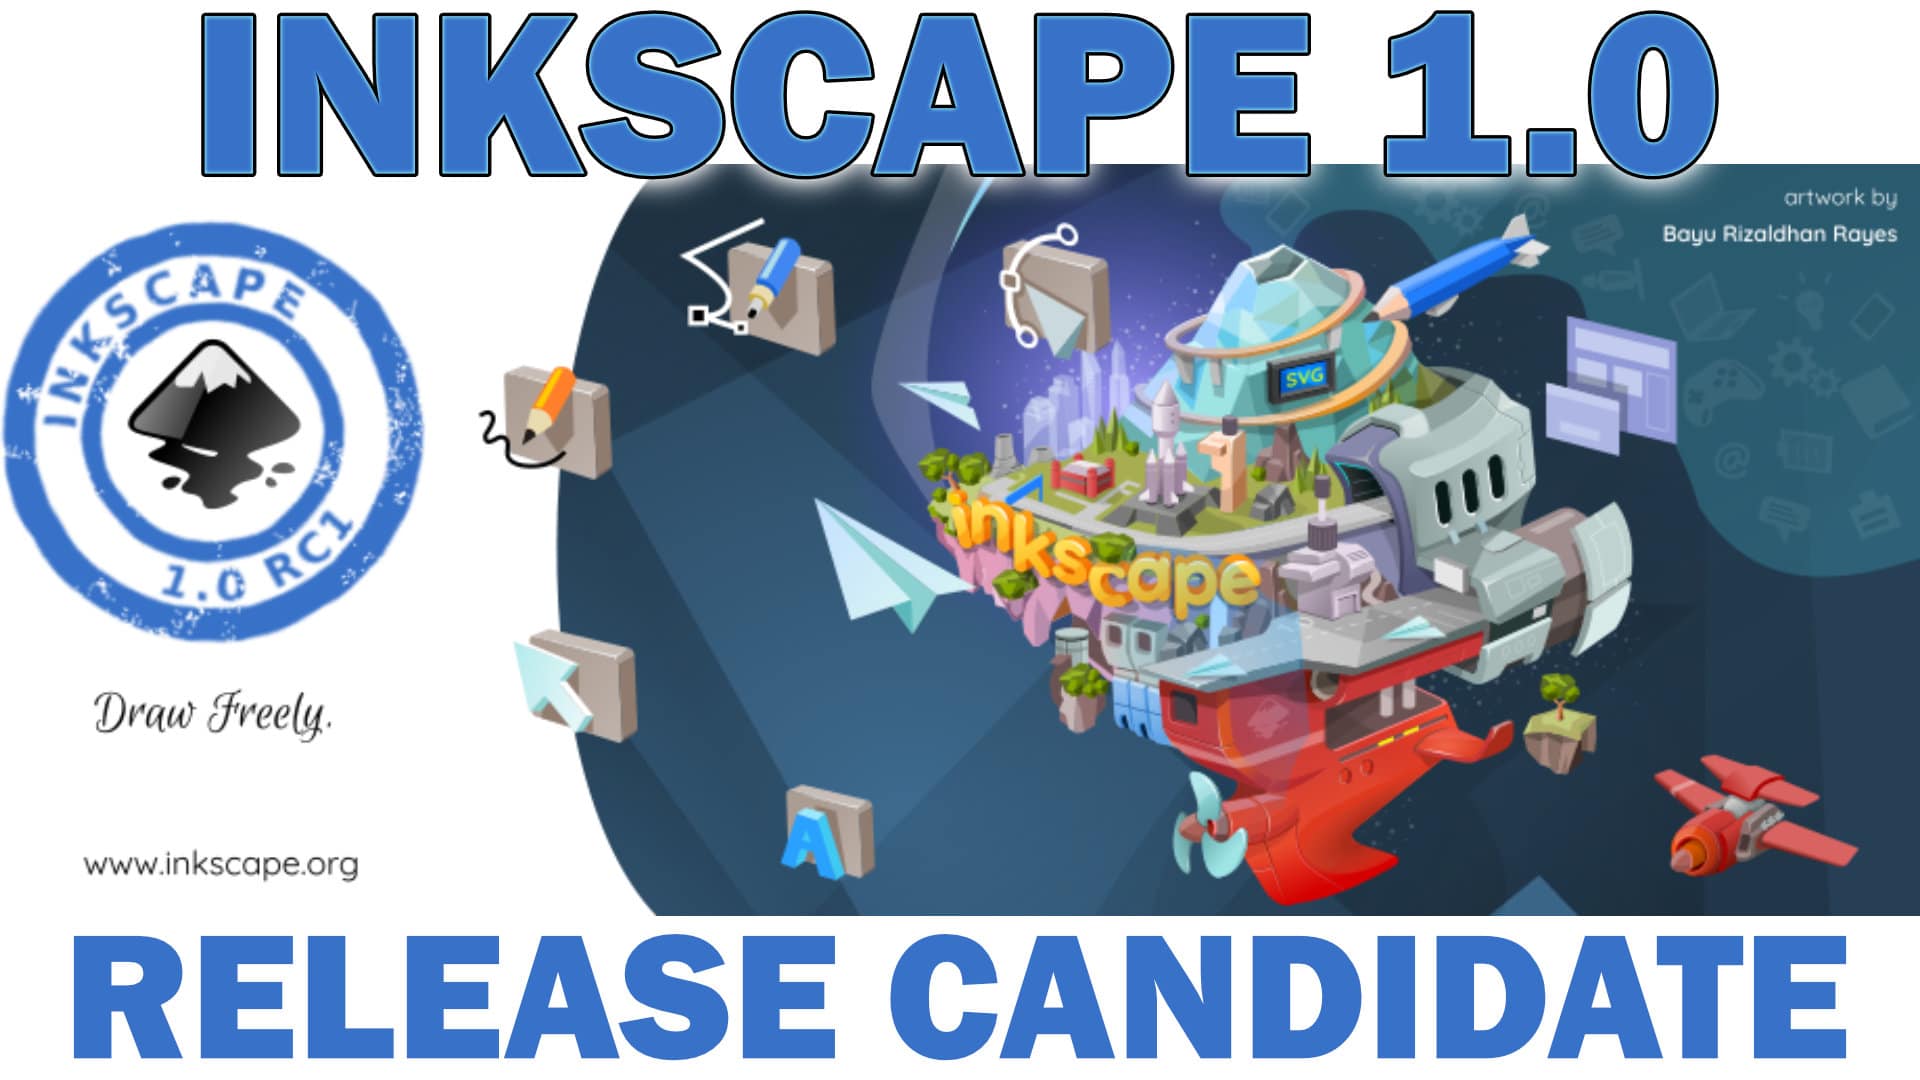 inkscape review 2013